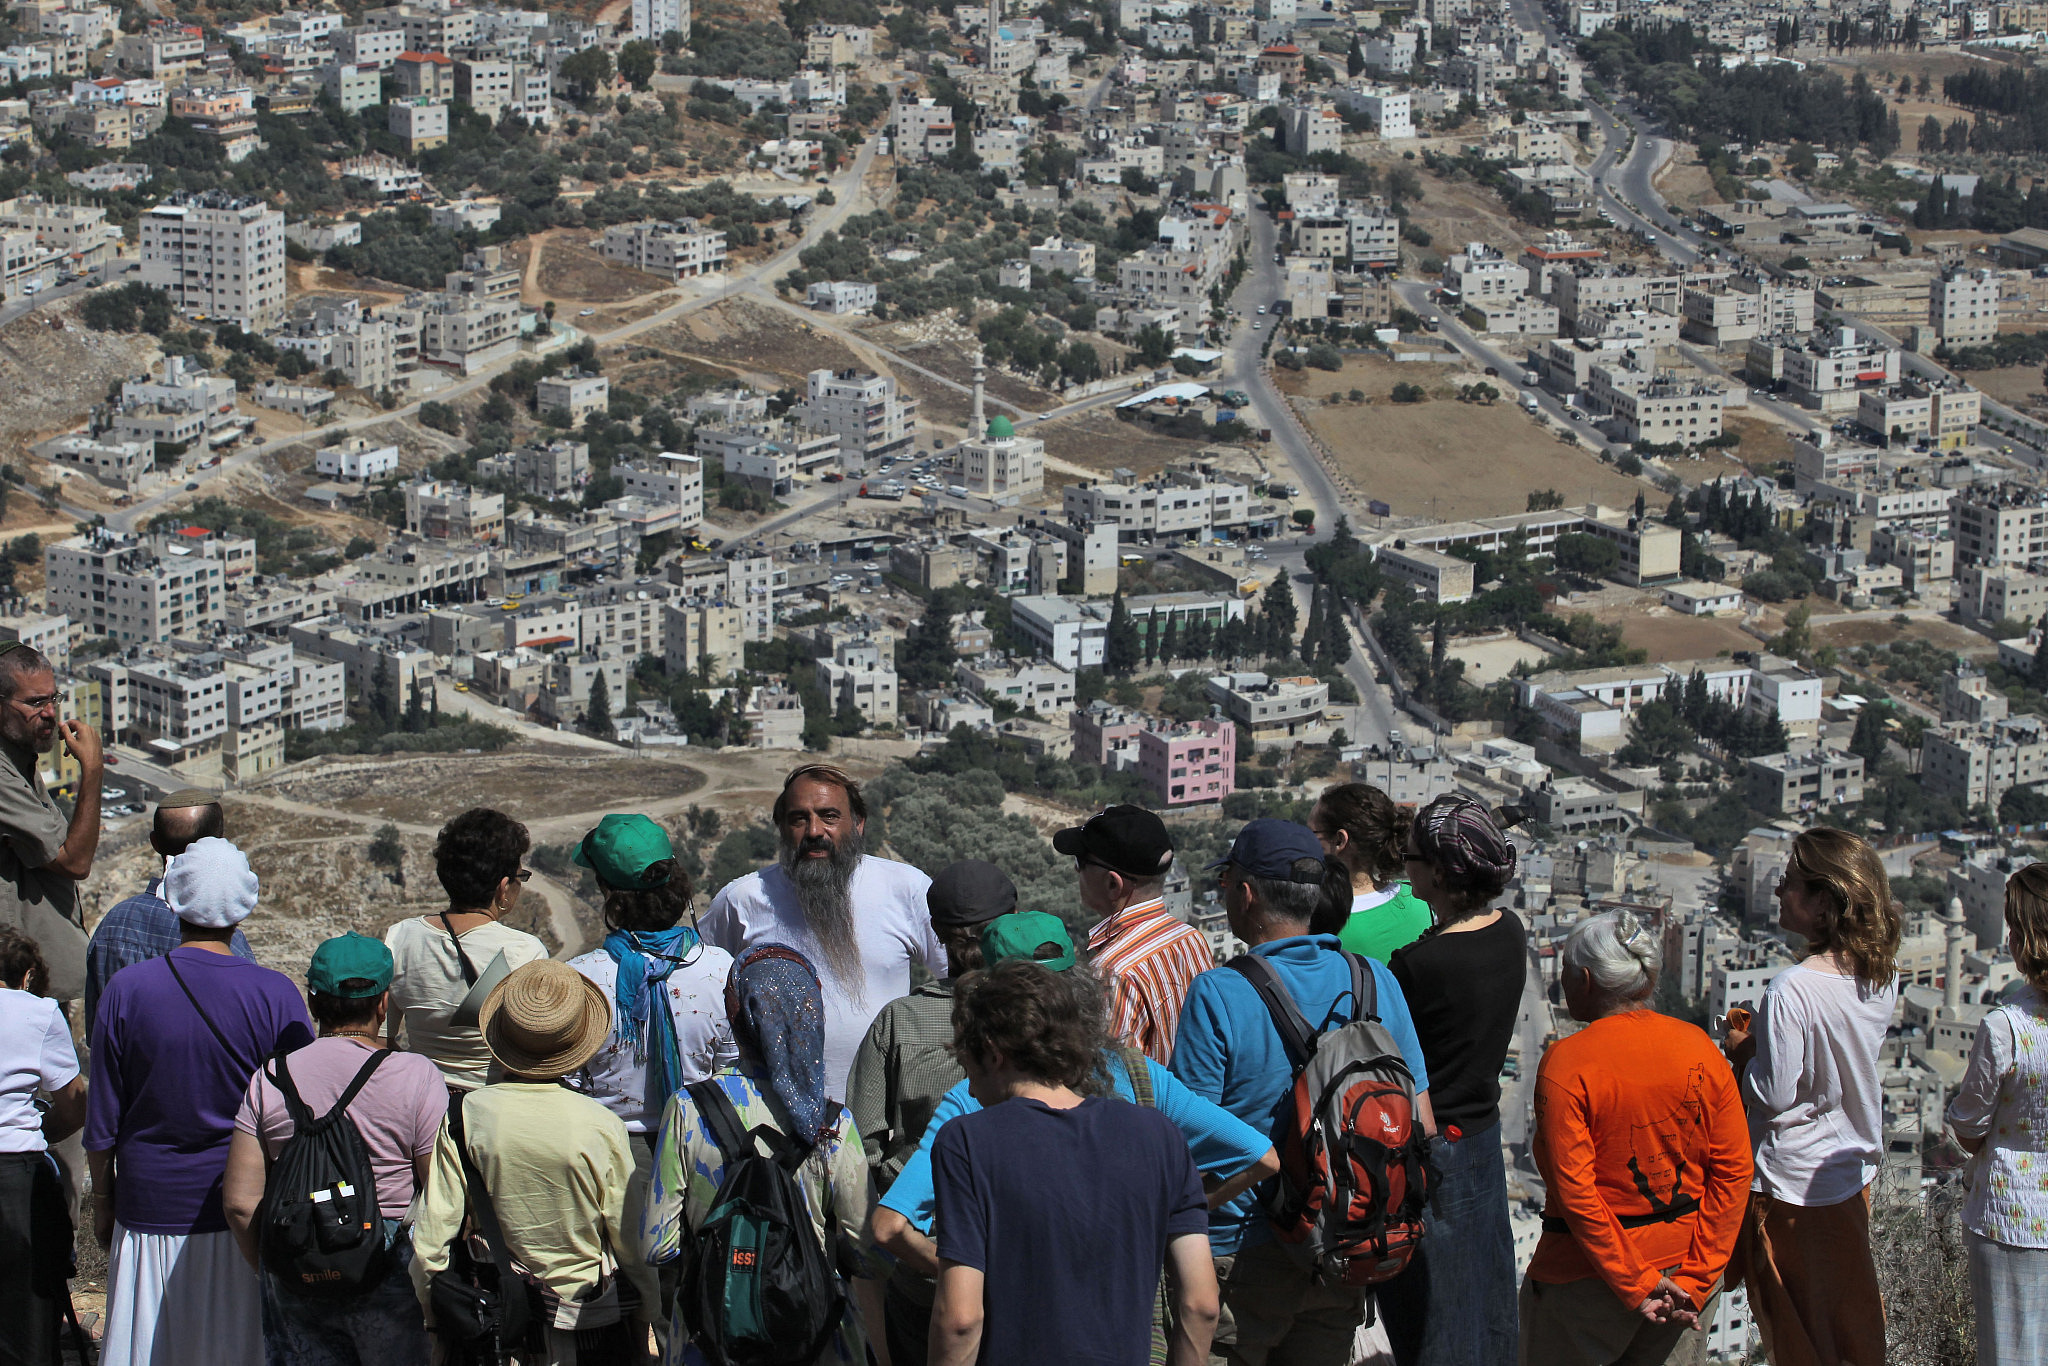 Religious Jews listen to a guide near Joseph's Tomb in the West Bank town of Nablus as they attend a tour led by activist Nadia Matar (not seen) of the Jewish settlements in the West Bank. Matar believes that the Land of Israel including the West Bank and Gaza was promised and belongs to the Jewish People, according to the Torah. September 23, 2009. (Nati Shohat/Flash90)